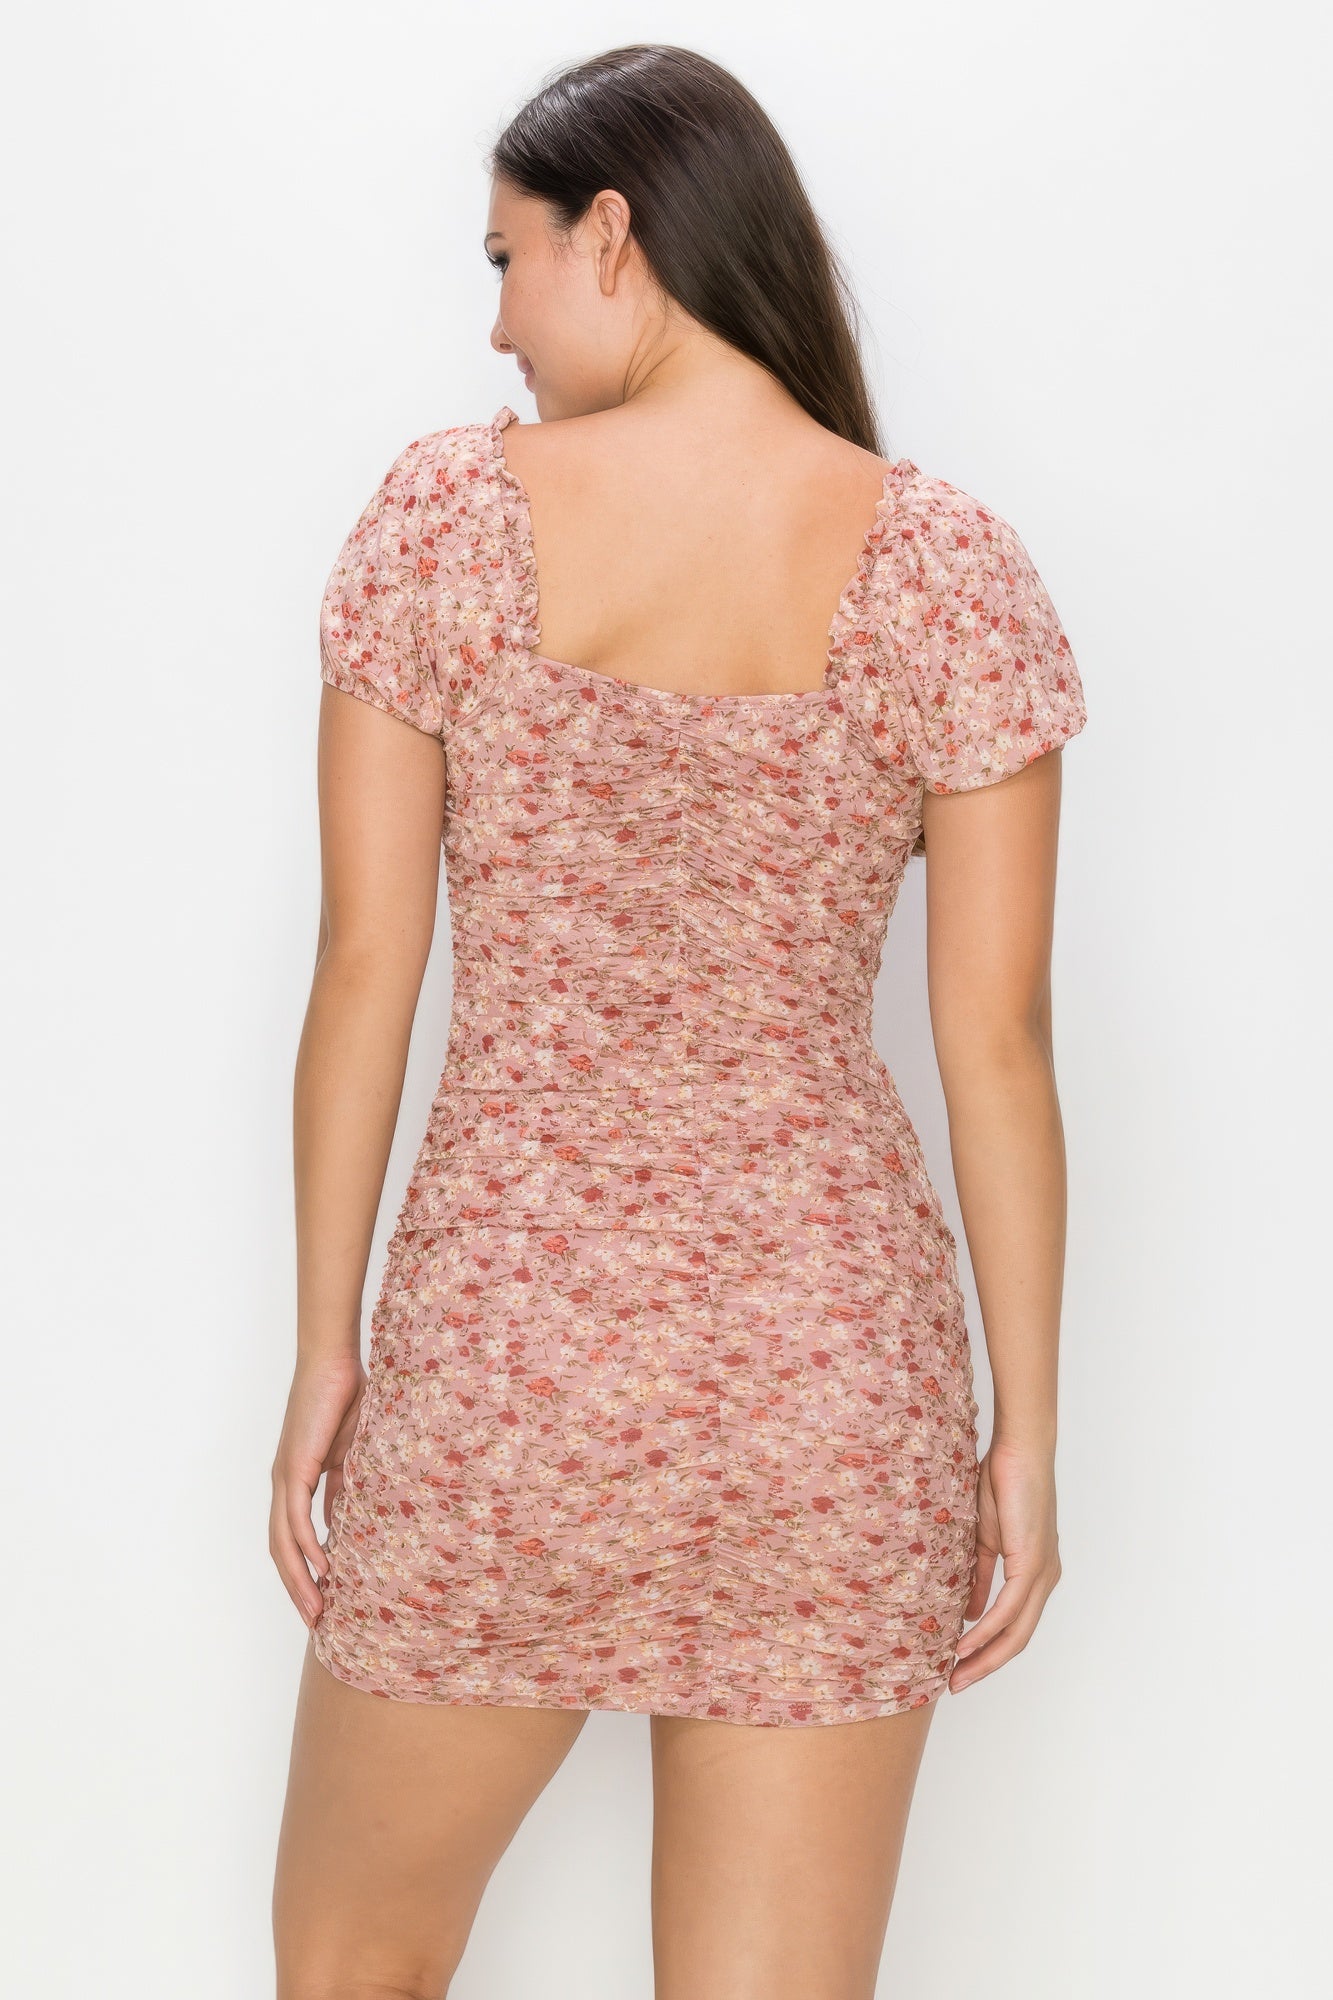 THE LILLI Ruched Floral Ruffled Bodycon Dress